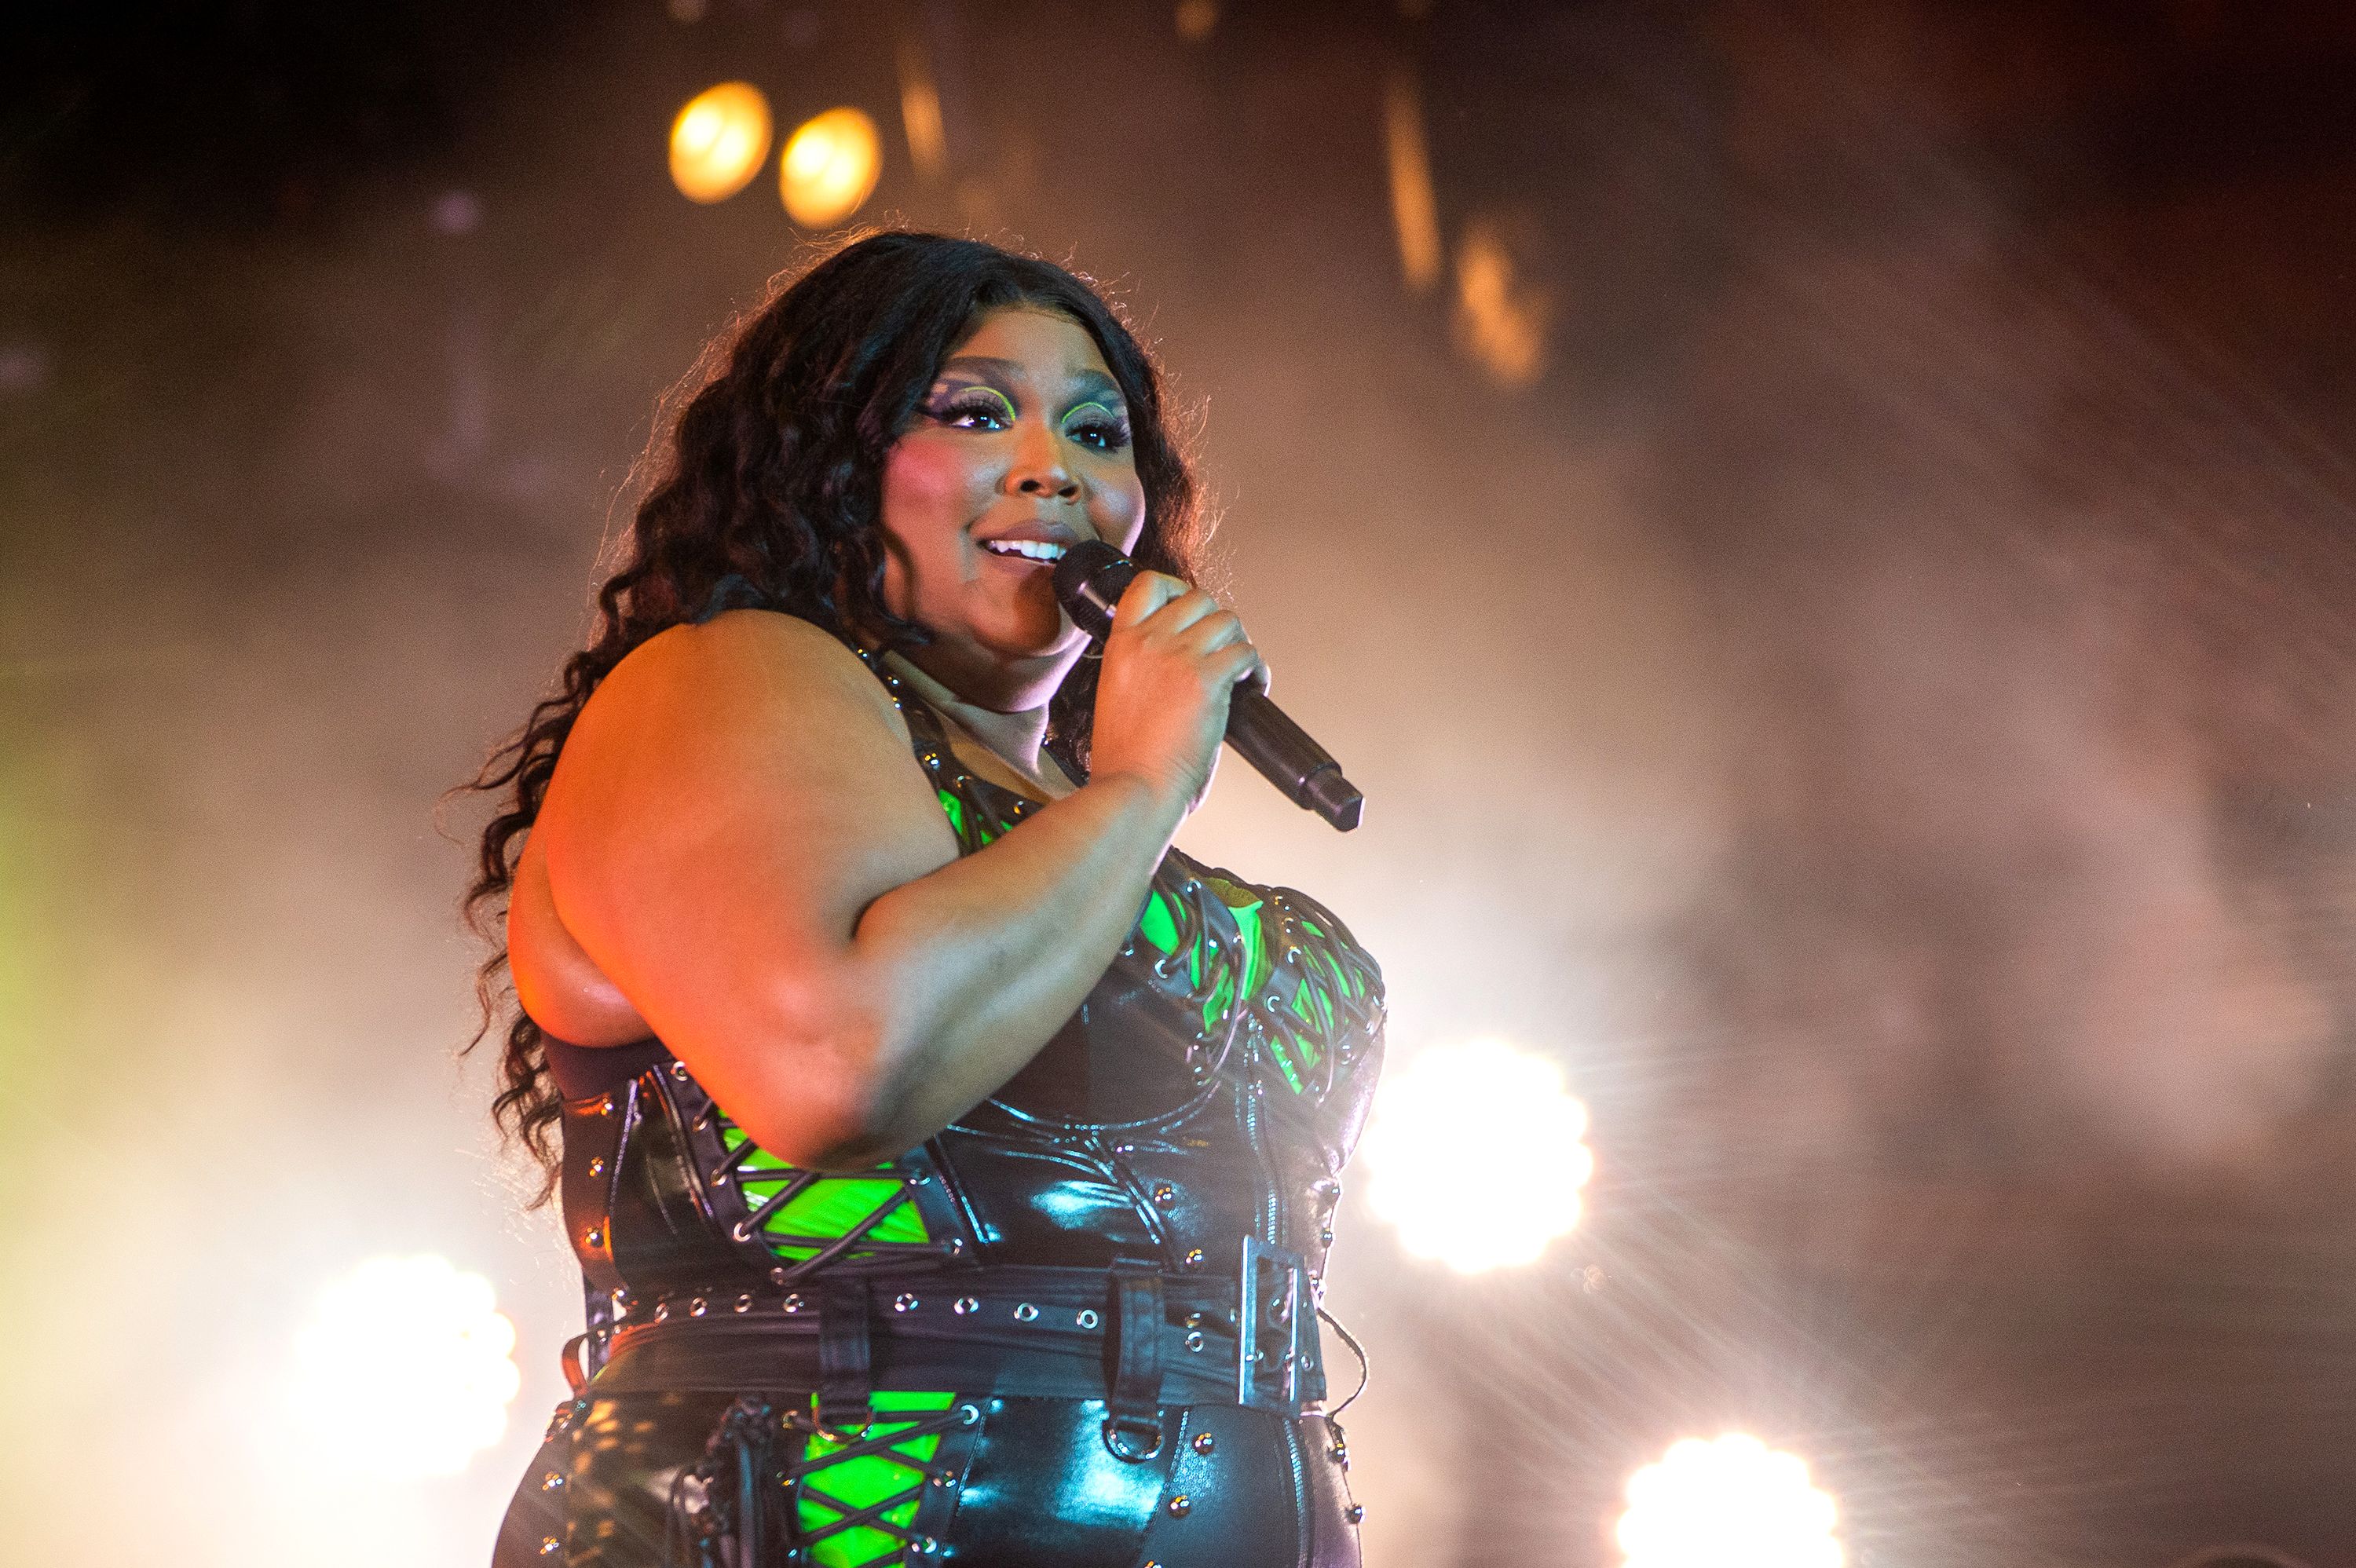 Not Allowing Skinny Women to Audition for Lizzo is Non-Inclusive